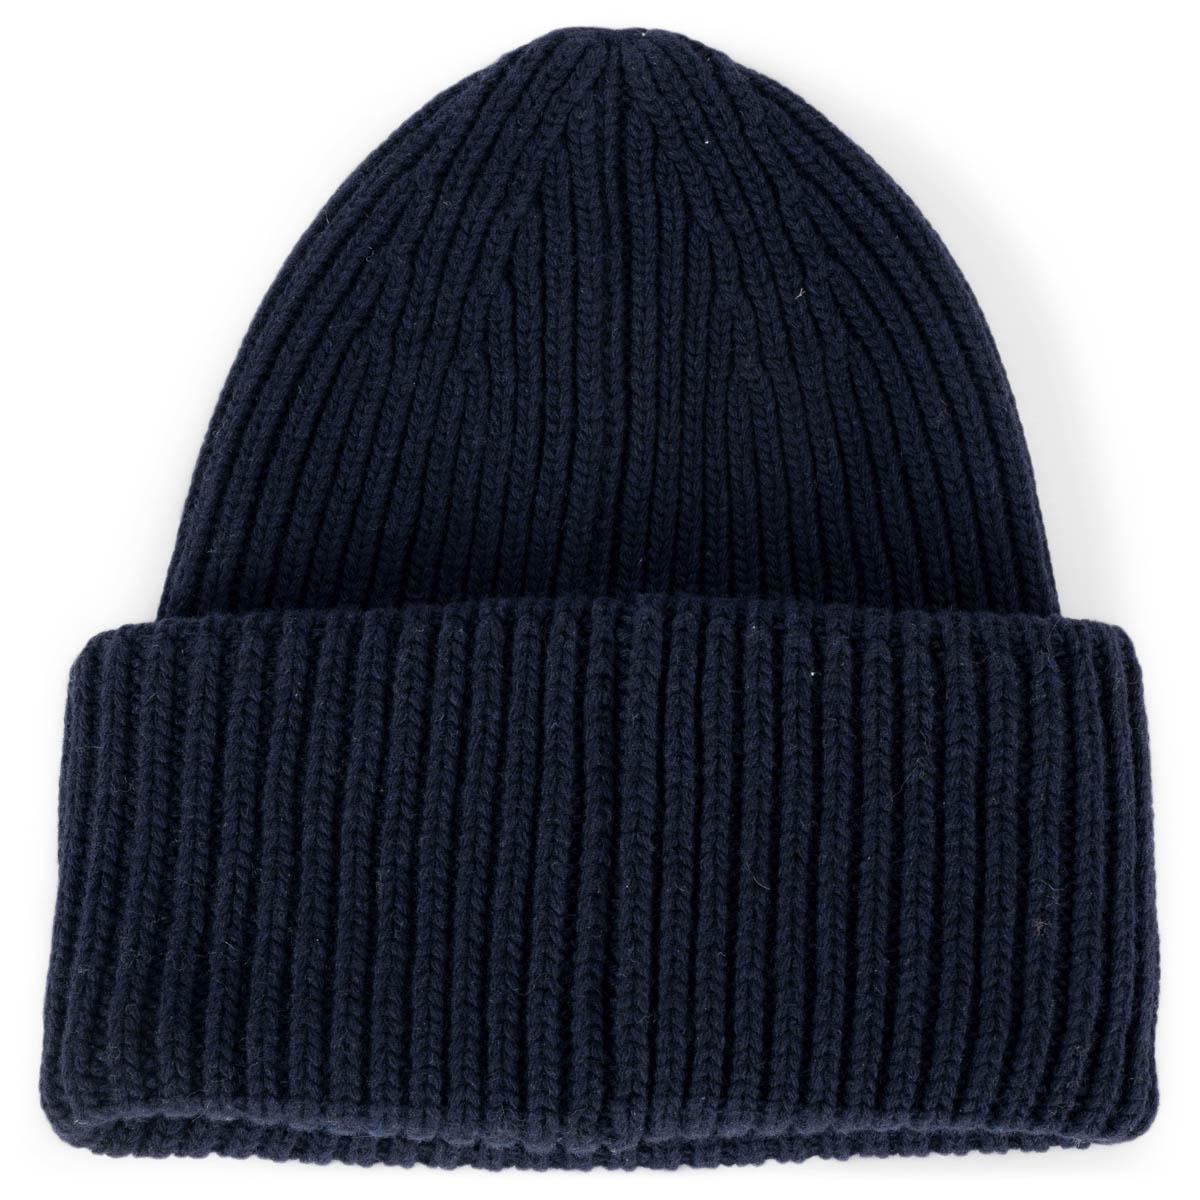 100% authentic Moncler x Palm Angels mid-weight knit, this plush beanie is crafted from navy carded wool. The ribbed knit accessory is embellished with a co-creation velvet logo patch. Has been worn and is in excellent condition. 

All our listings